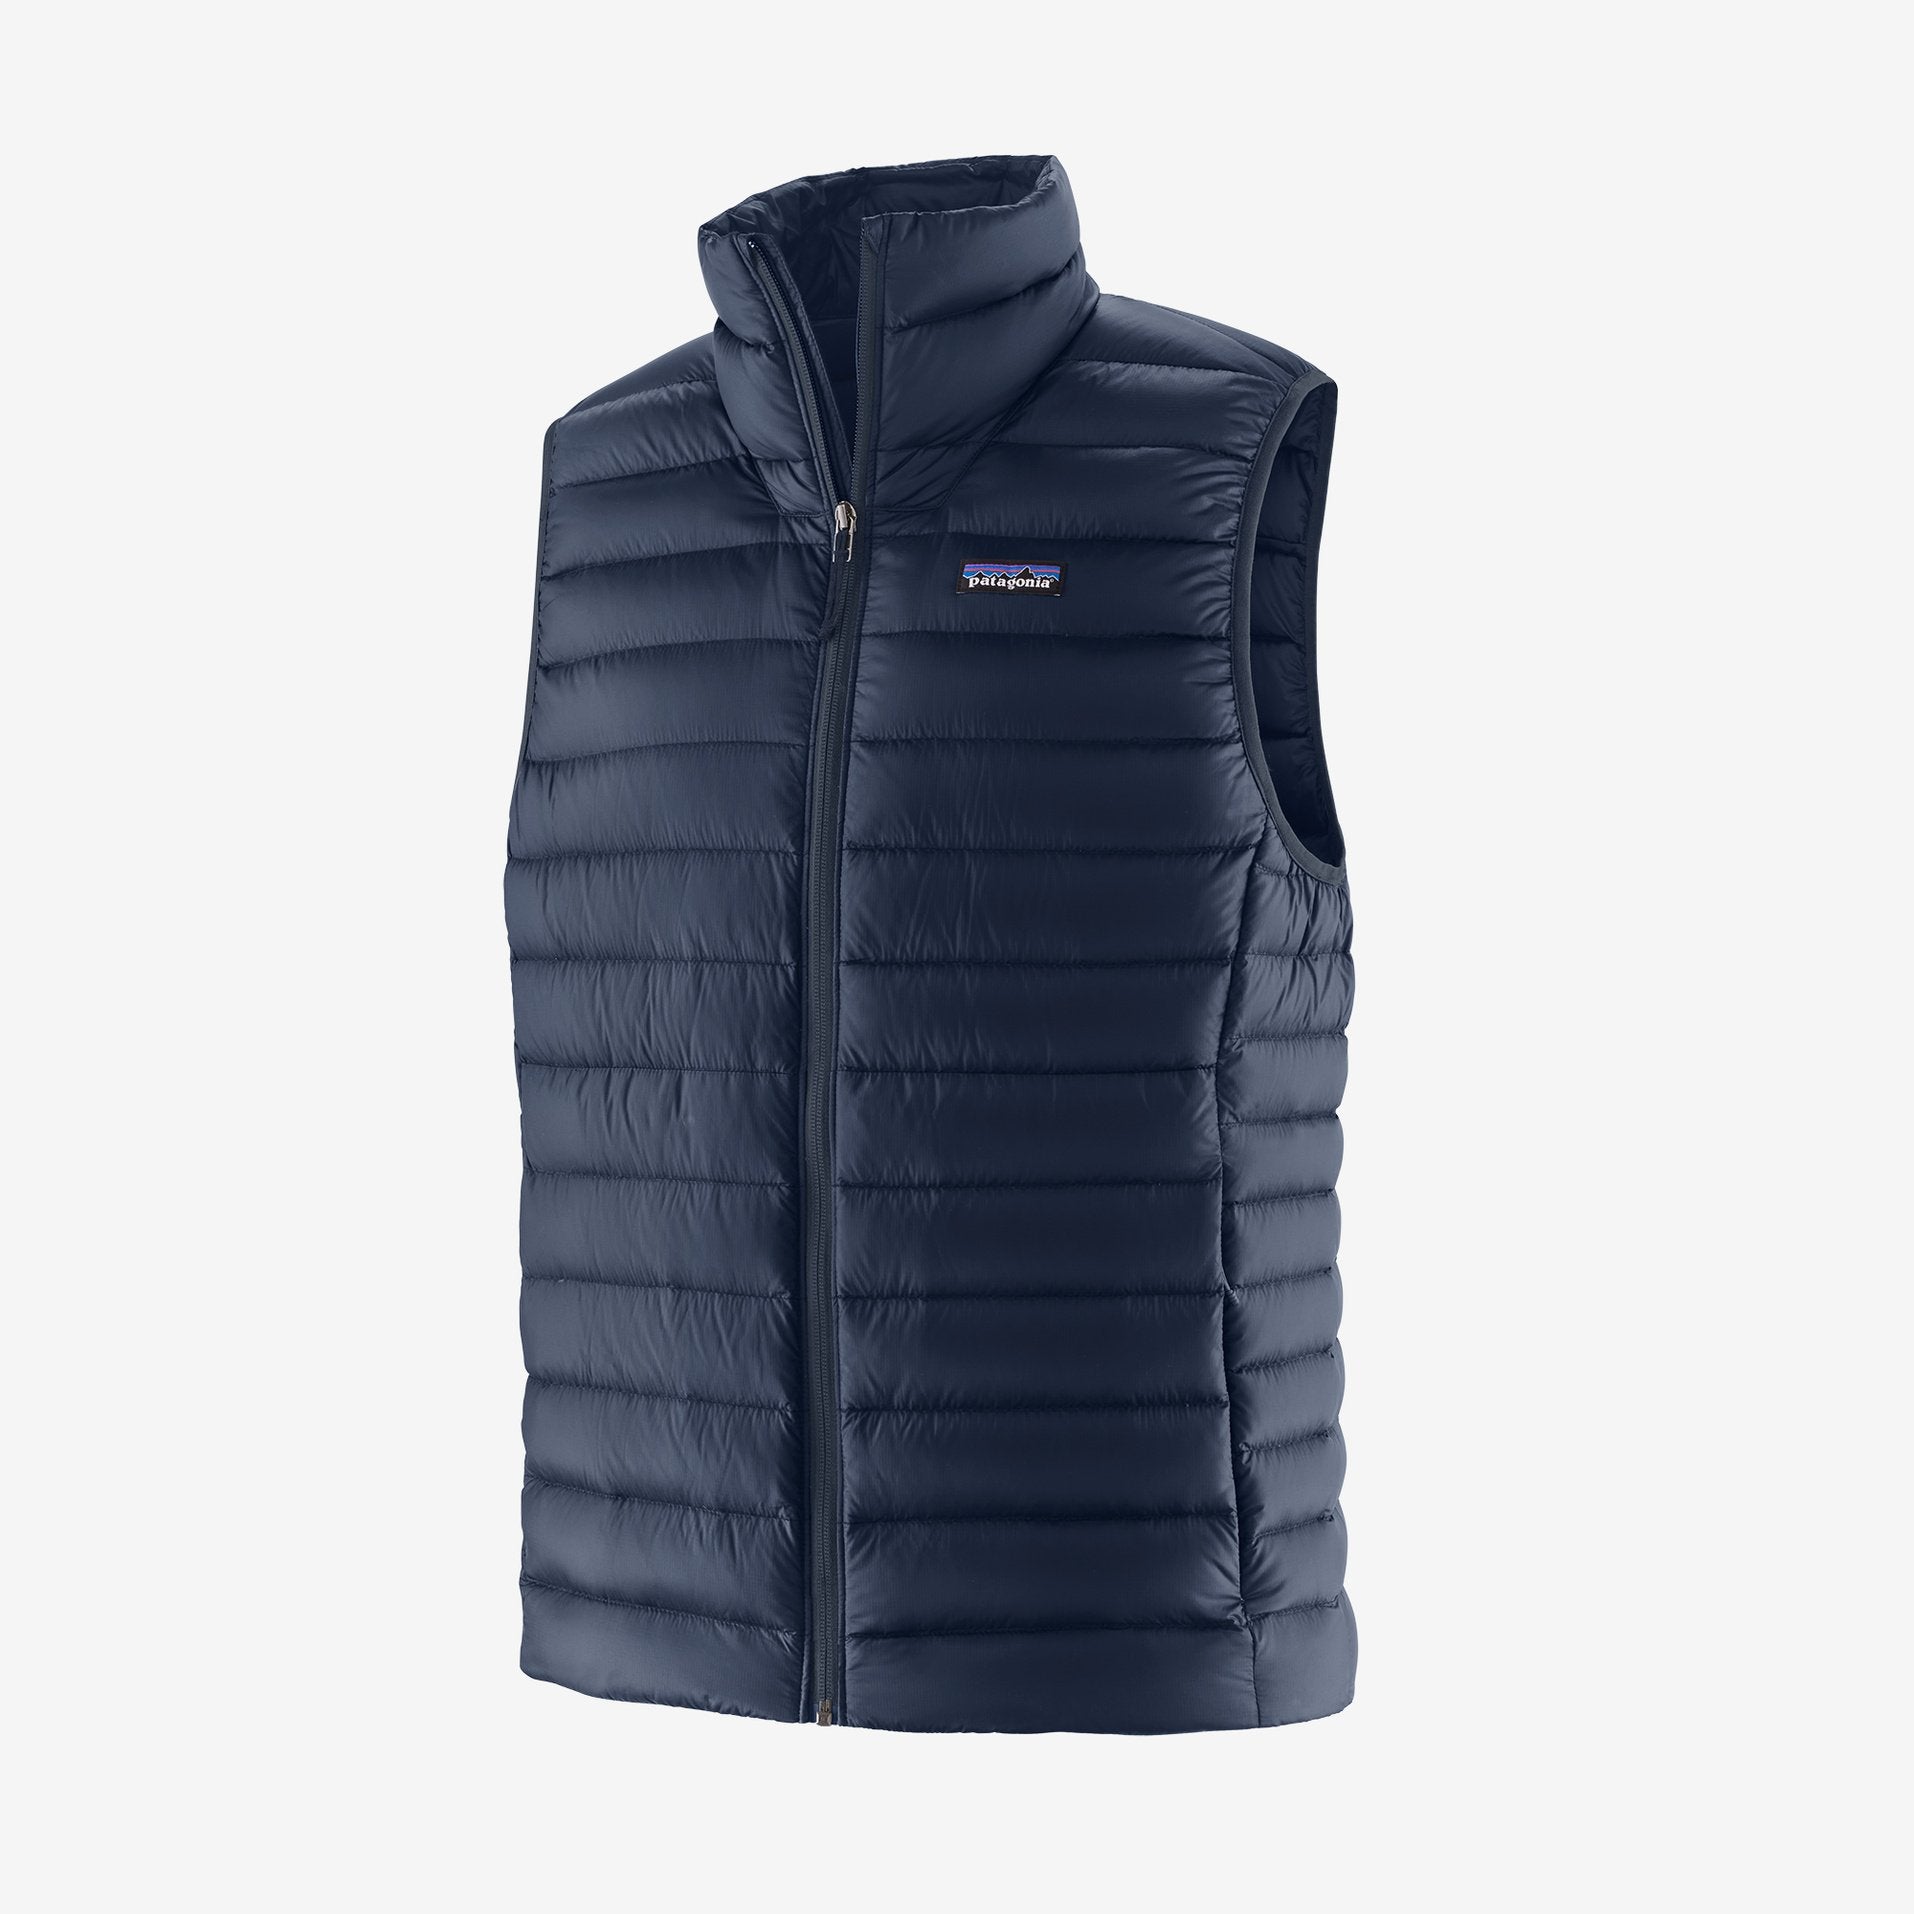 Patagonia Men's Down Sweater Vest Apparel Patagonia New Navy-NENA Small 